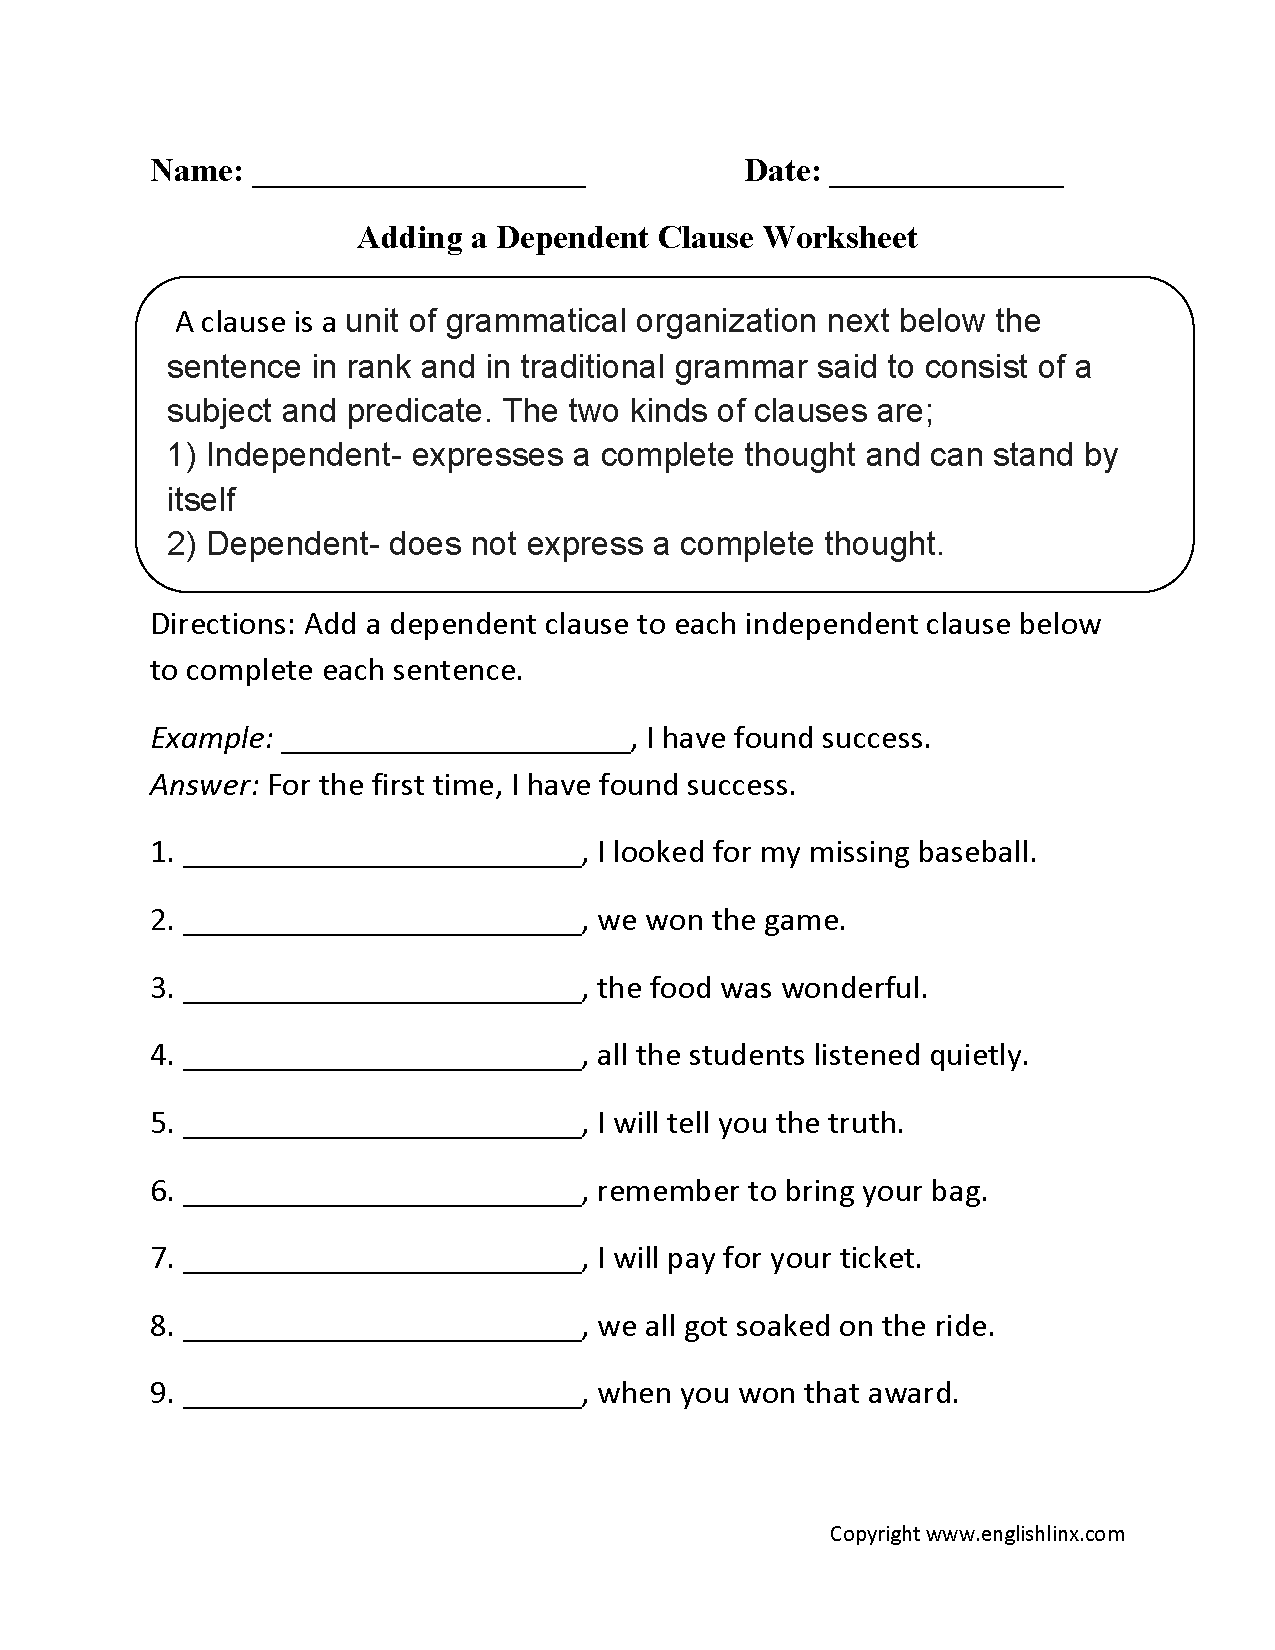 Adding a Dependent Clause Worksheet